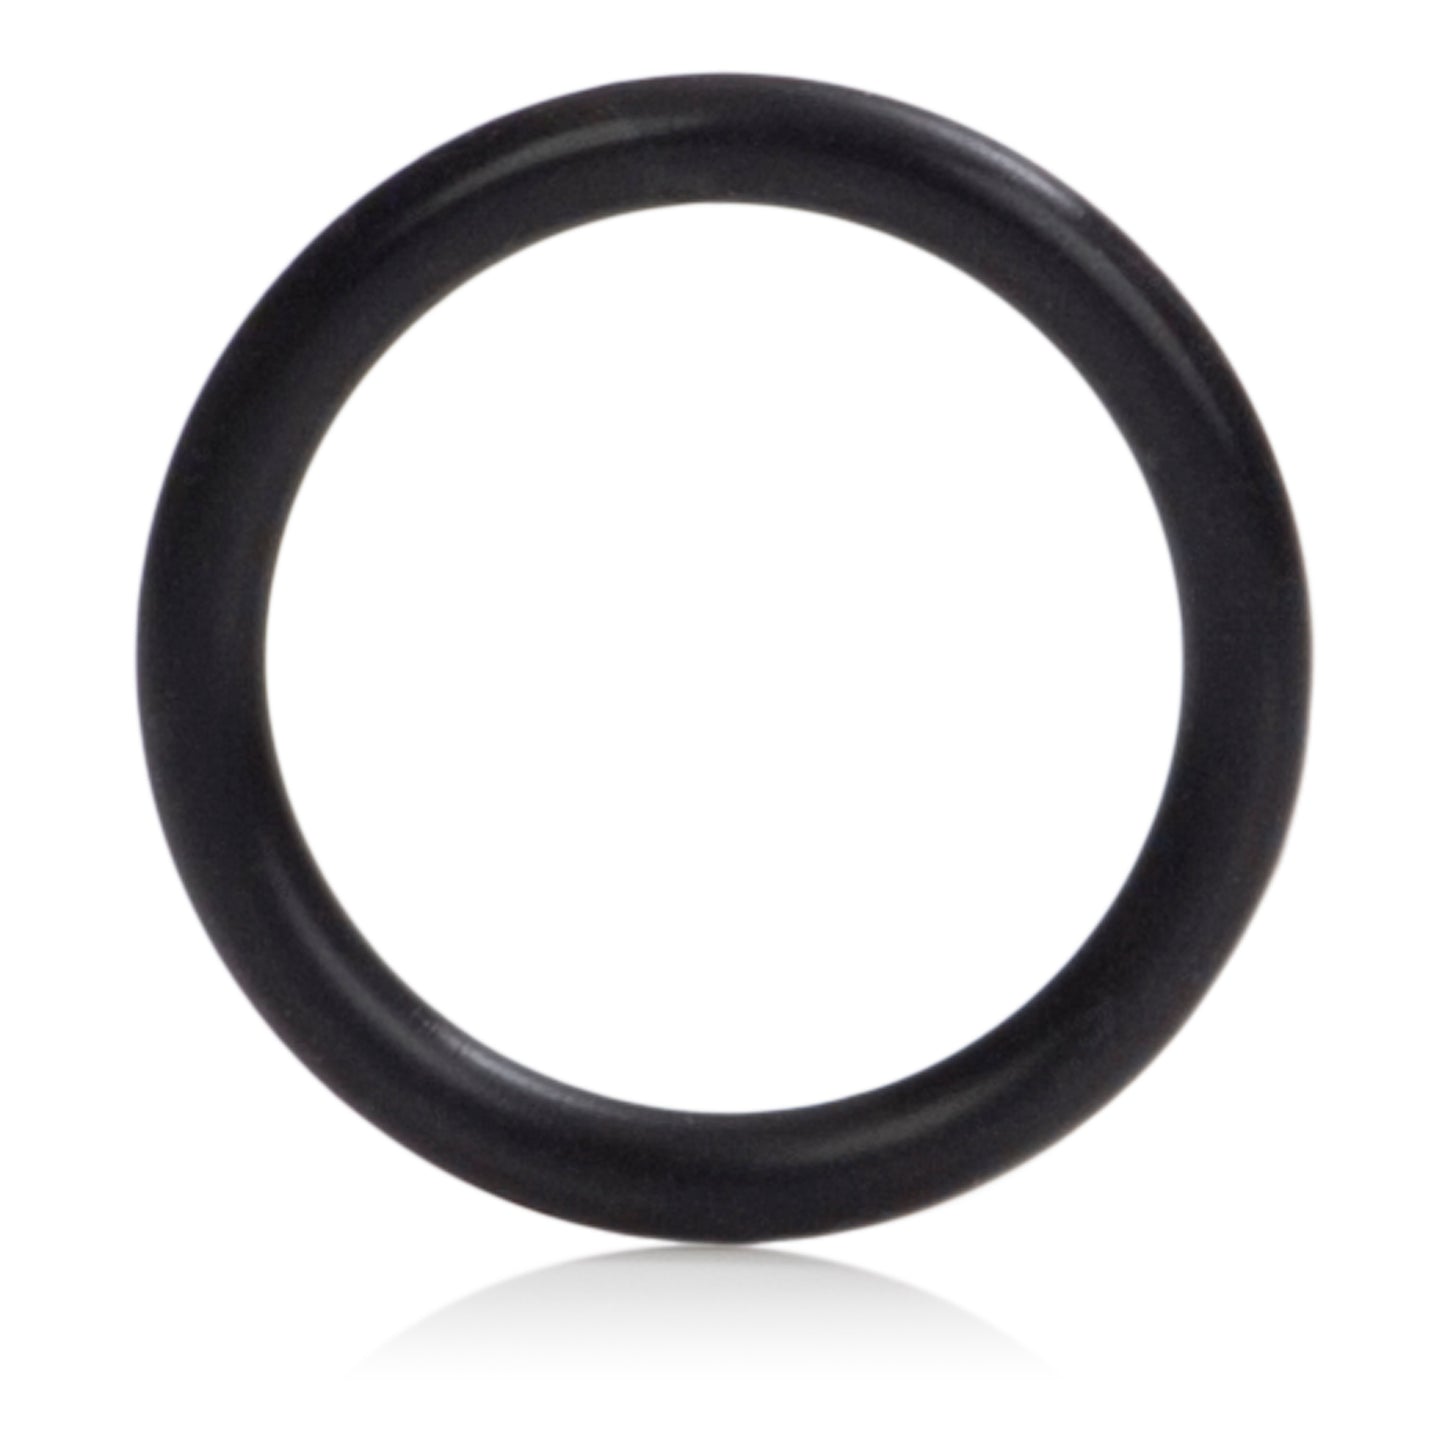 Silicone Support Rings - Black